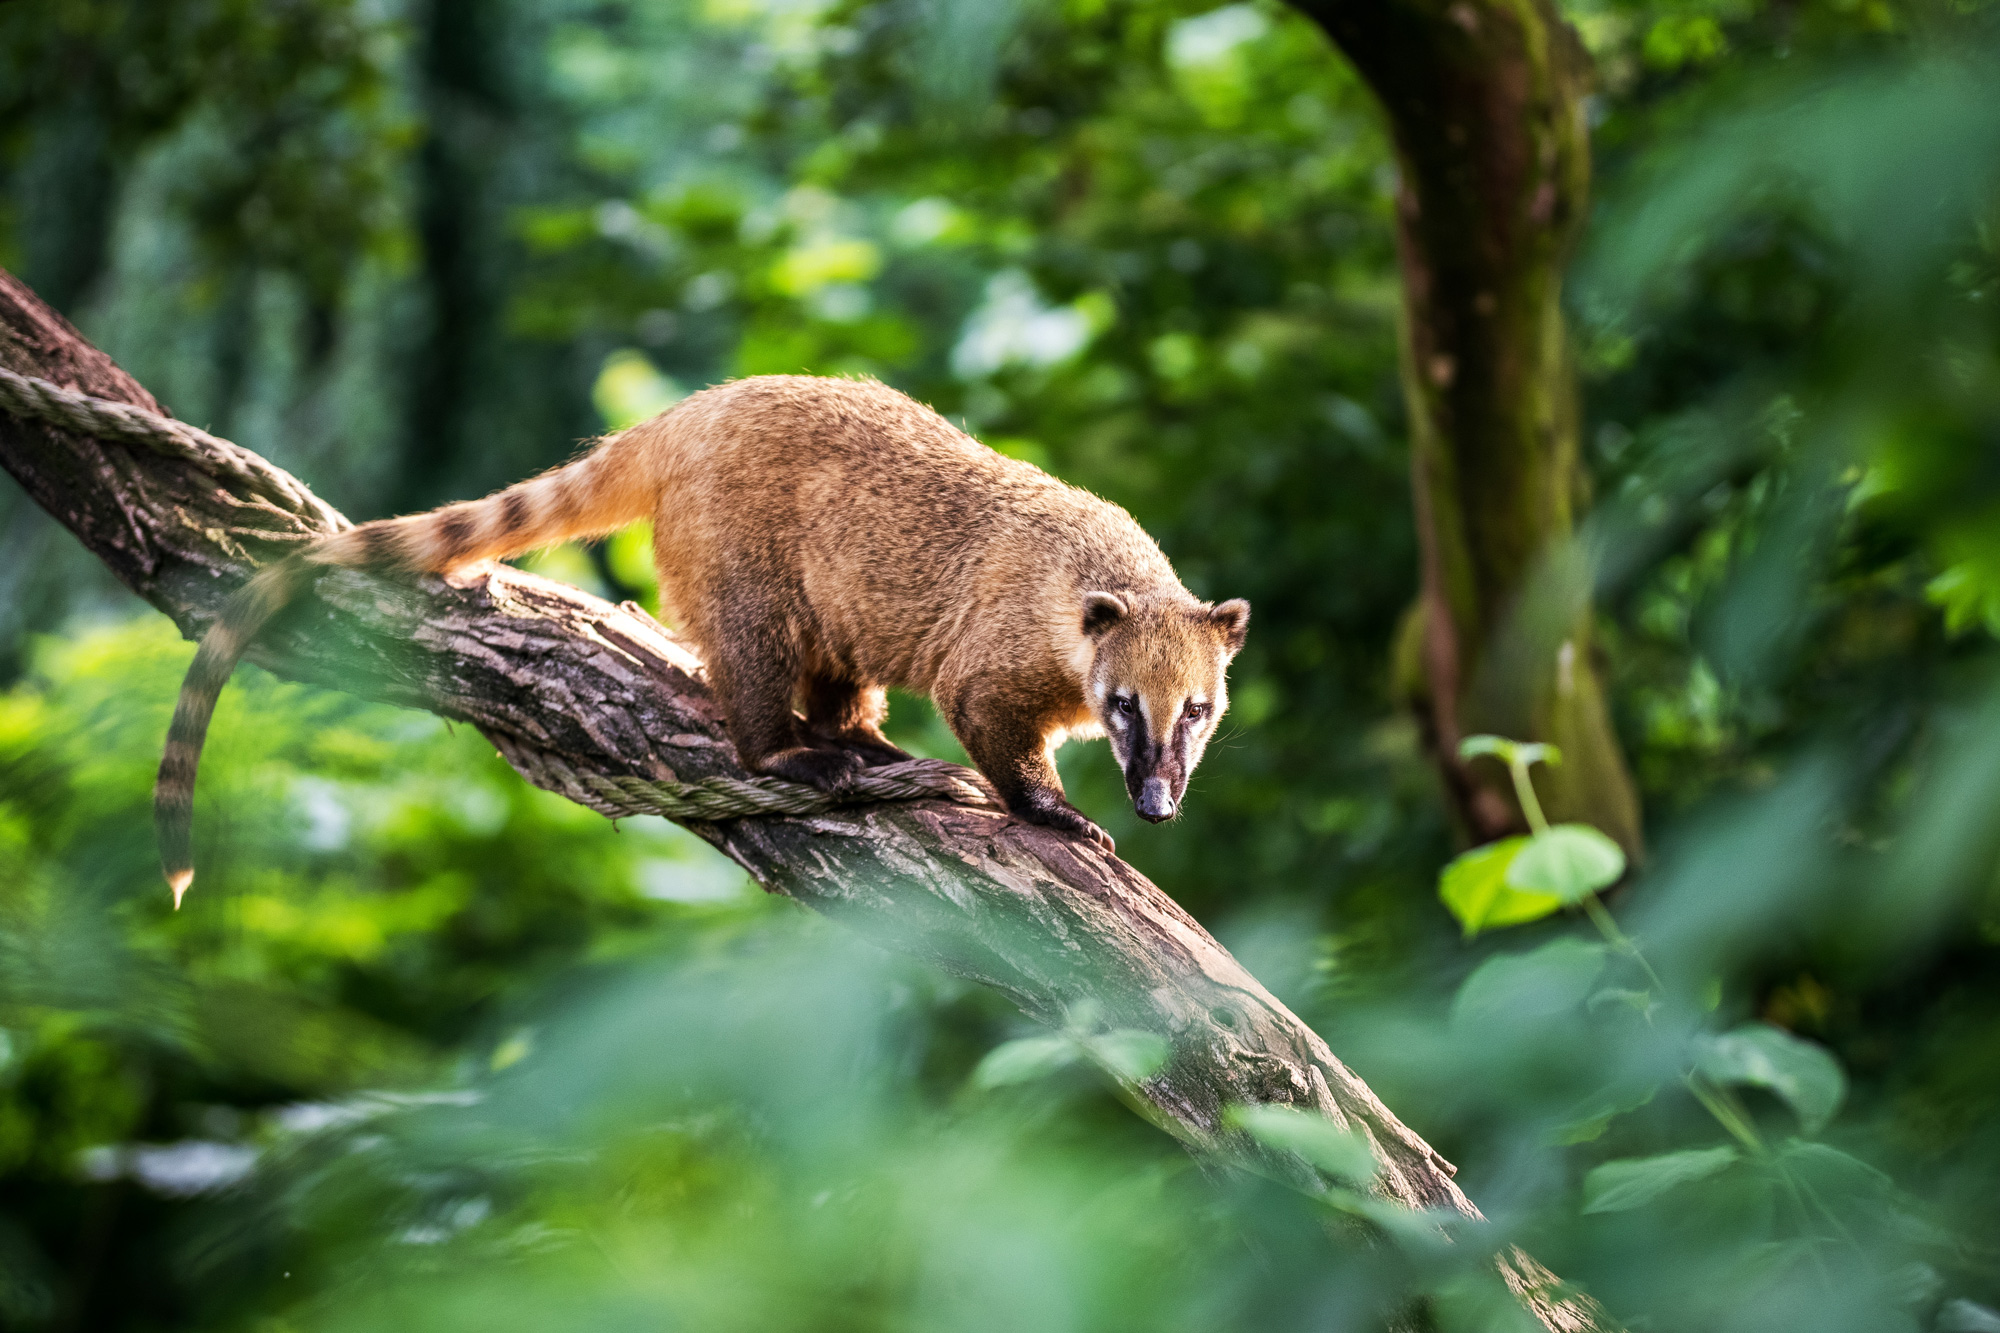 A coati sitting on a branch in the rainforest